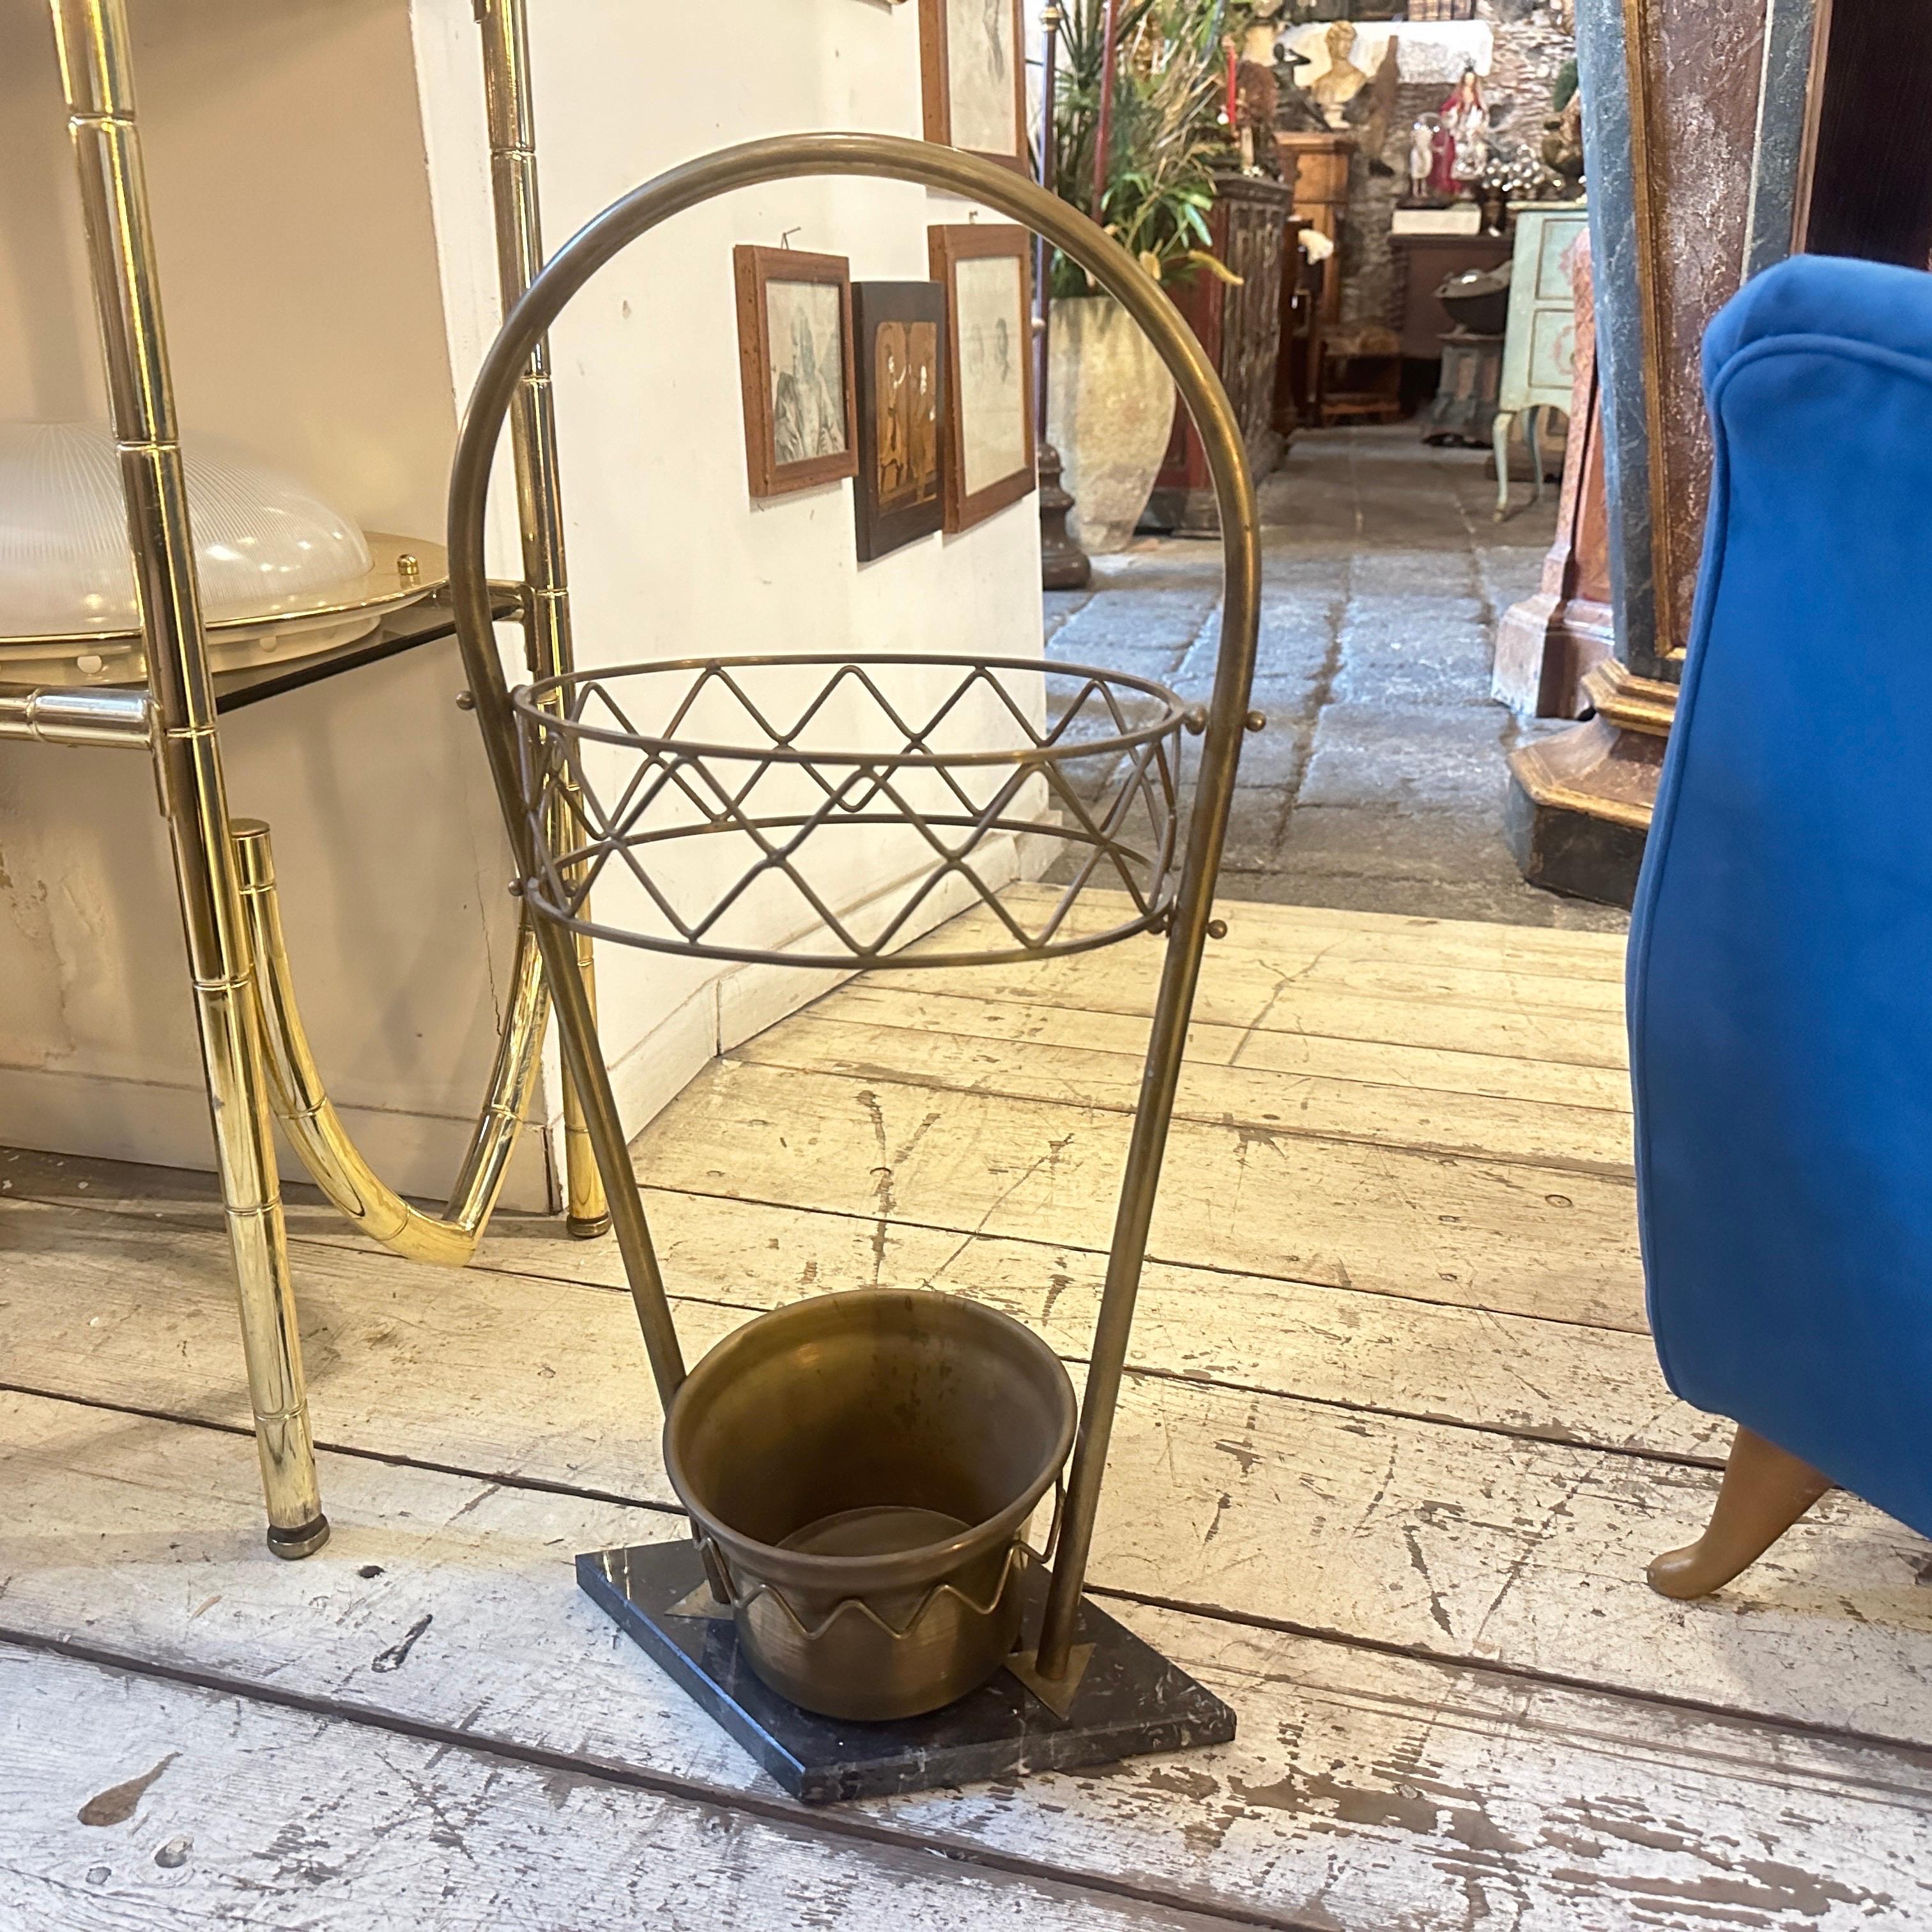 An amazing marble and brass umbrella stand designed and manufactured in Italy in the Fifties in the style of Giò Ponti, brass it's in original patina, black and white marble it's in perfect condition. This umbrella stand reflects the Mid-Century